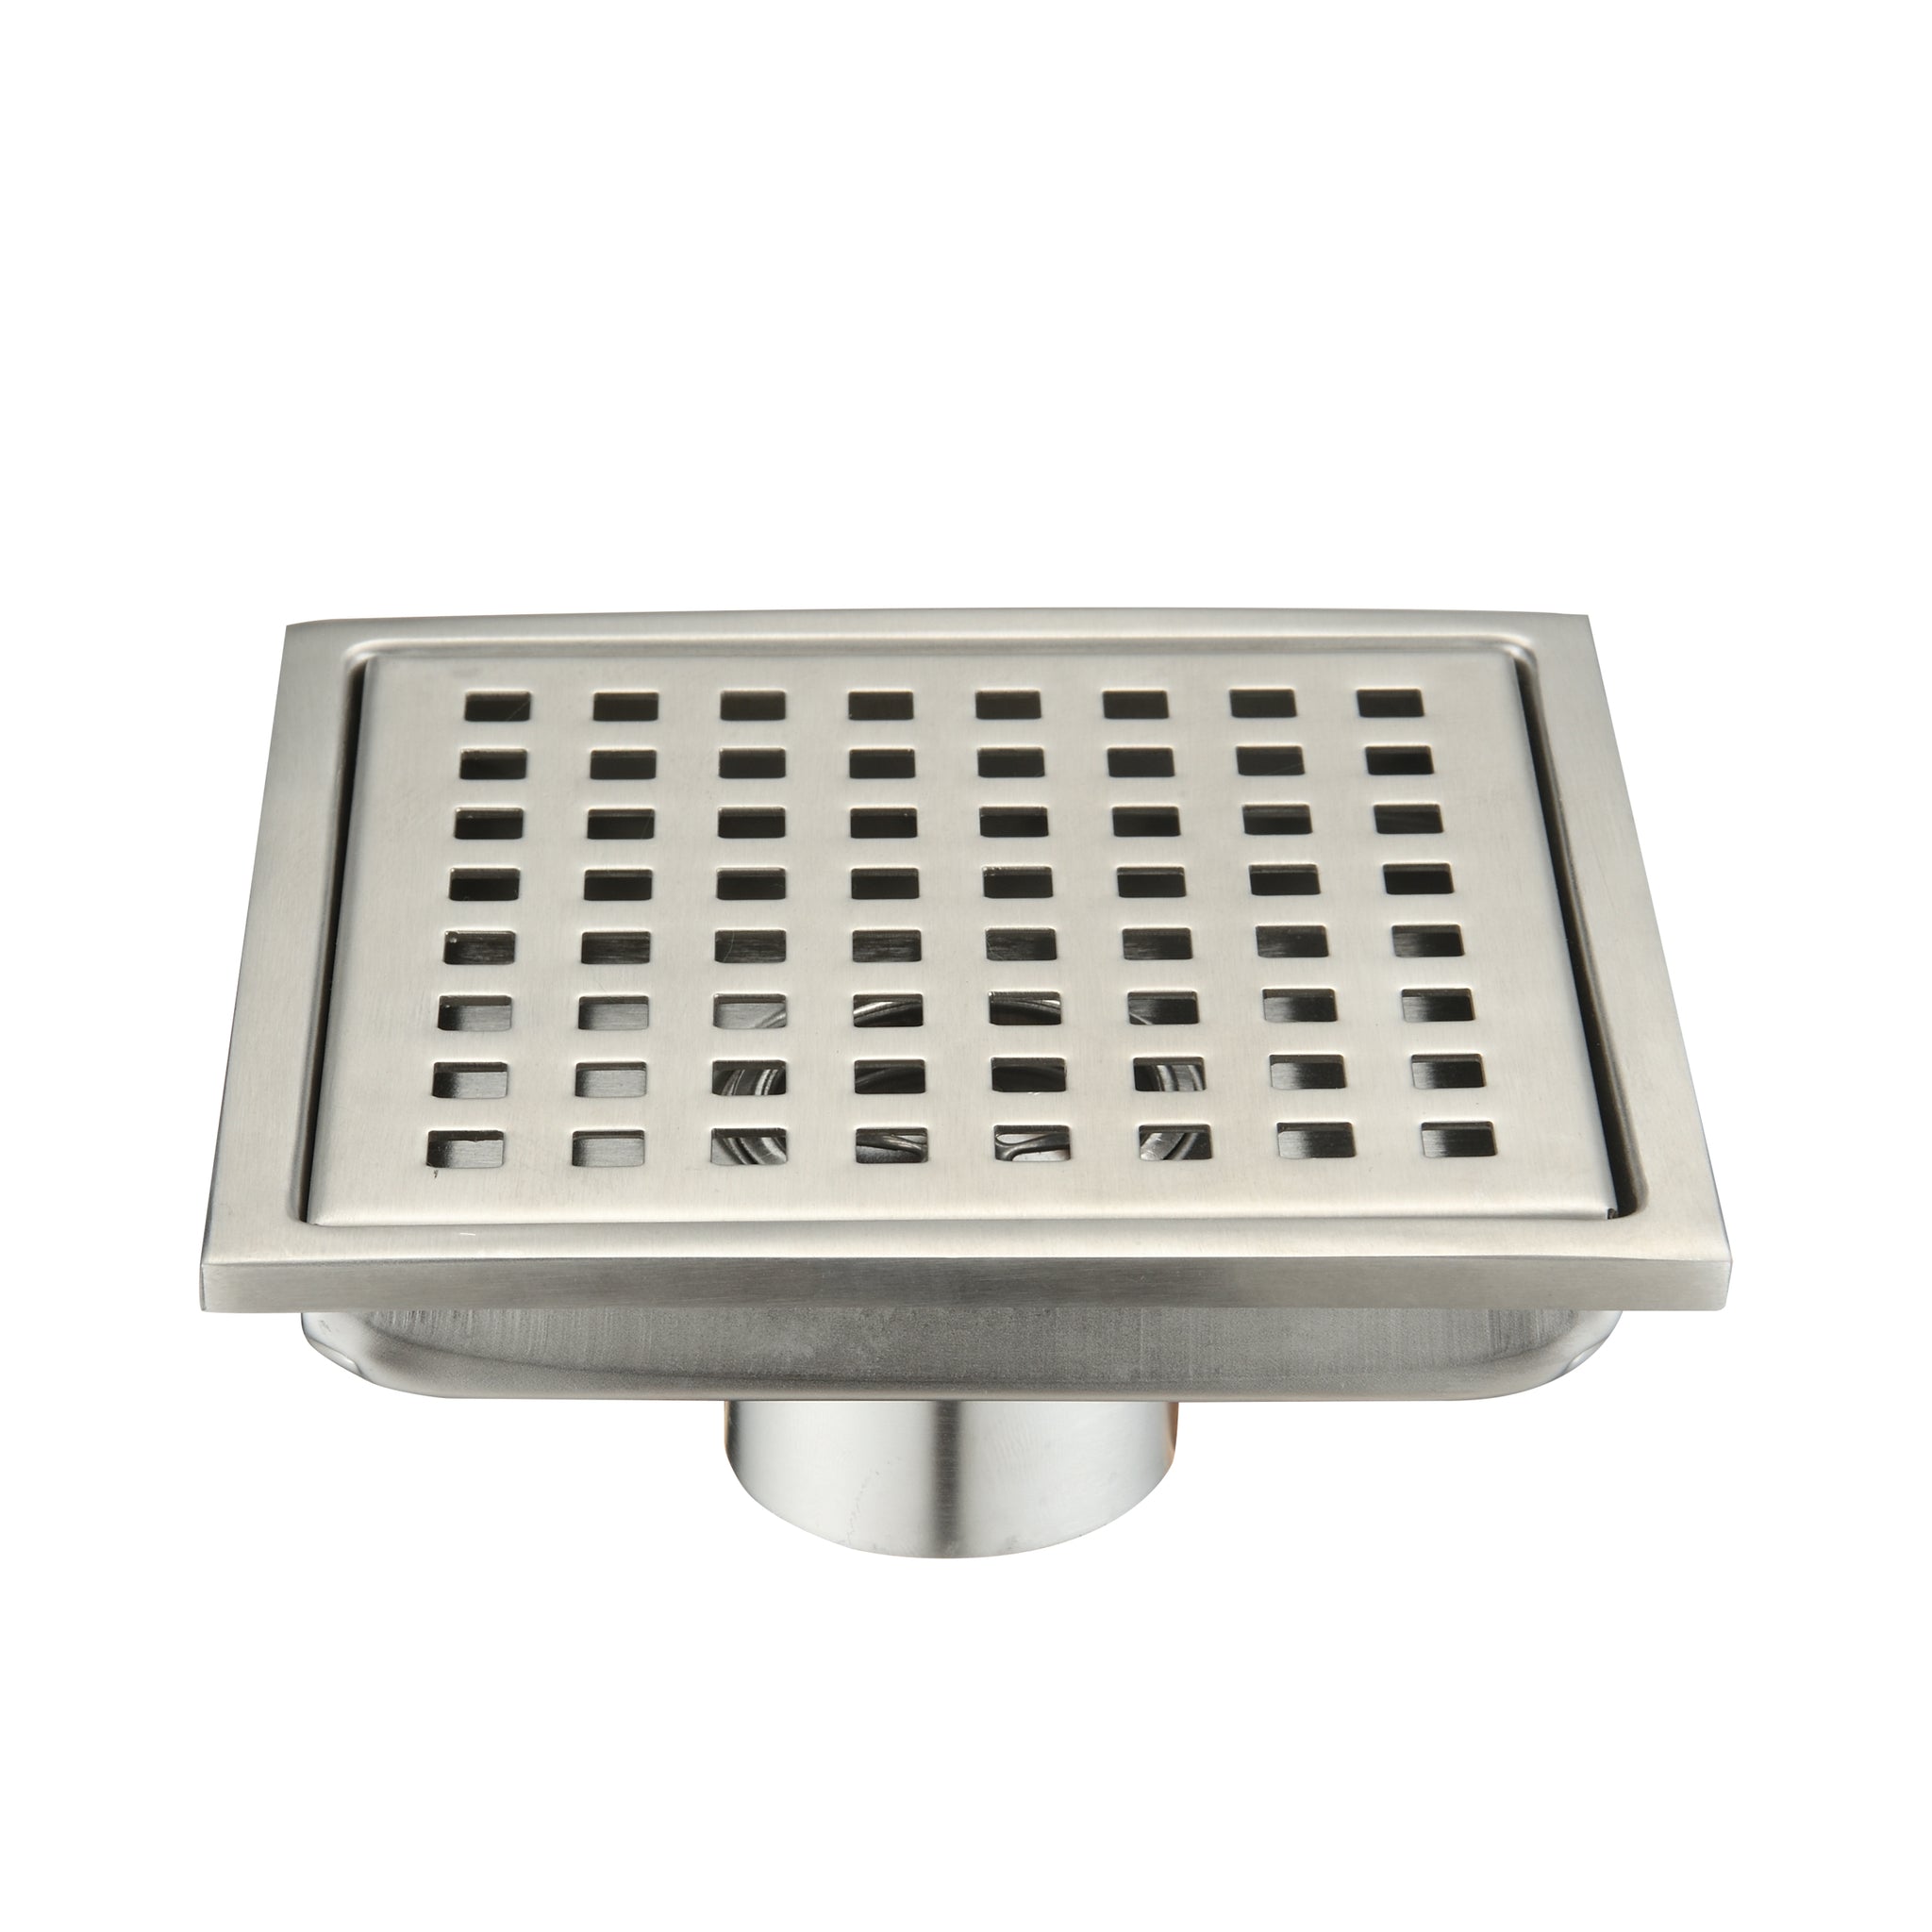 6 Inch Square Shower Floor Drain brushed nickel-stainless steel